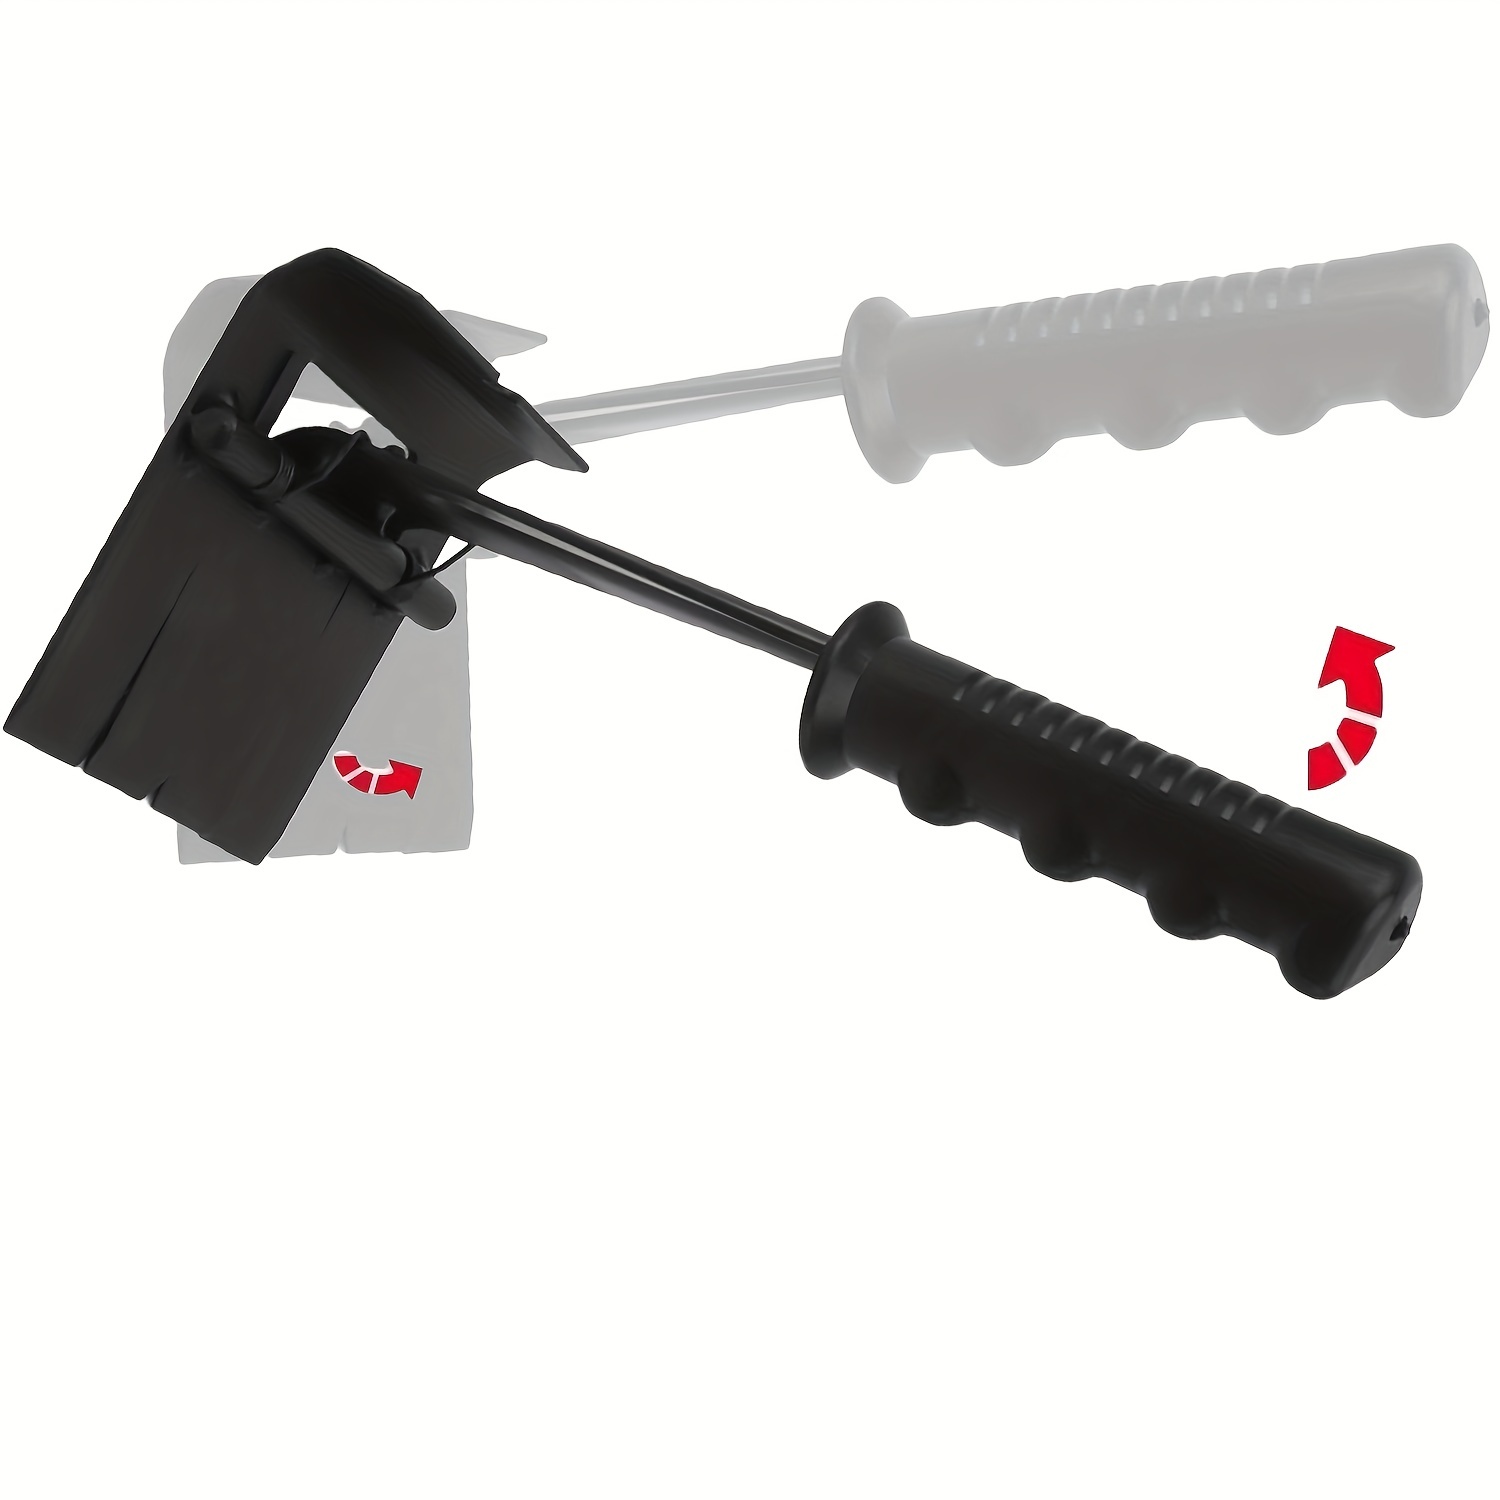  Trim Puller, Tile Removal Tool Heavy Duty Pry Bar Molding  Removal Tool For Removing Wood Floor, Baseboard, Tiles, Nail Pulling And  More, Built In Nail Puller And Socket Wrench